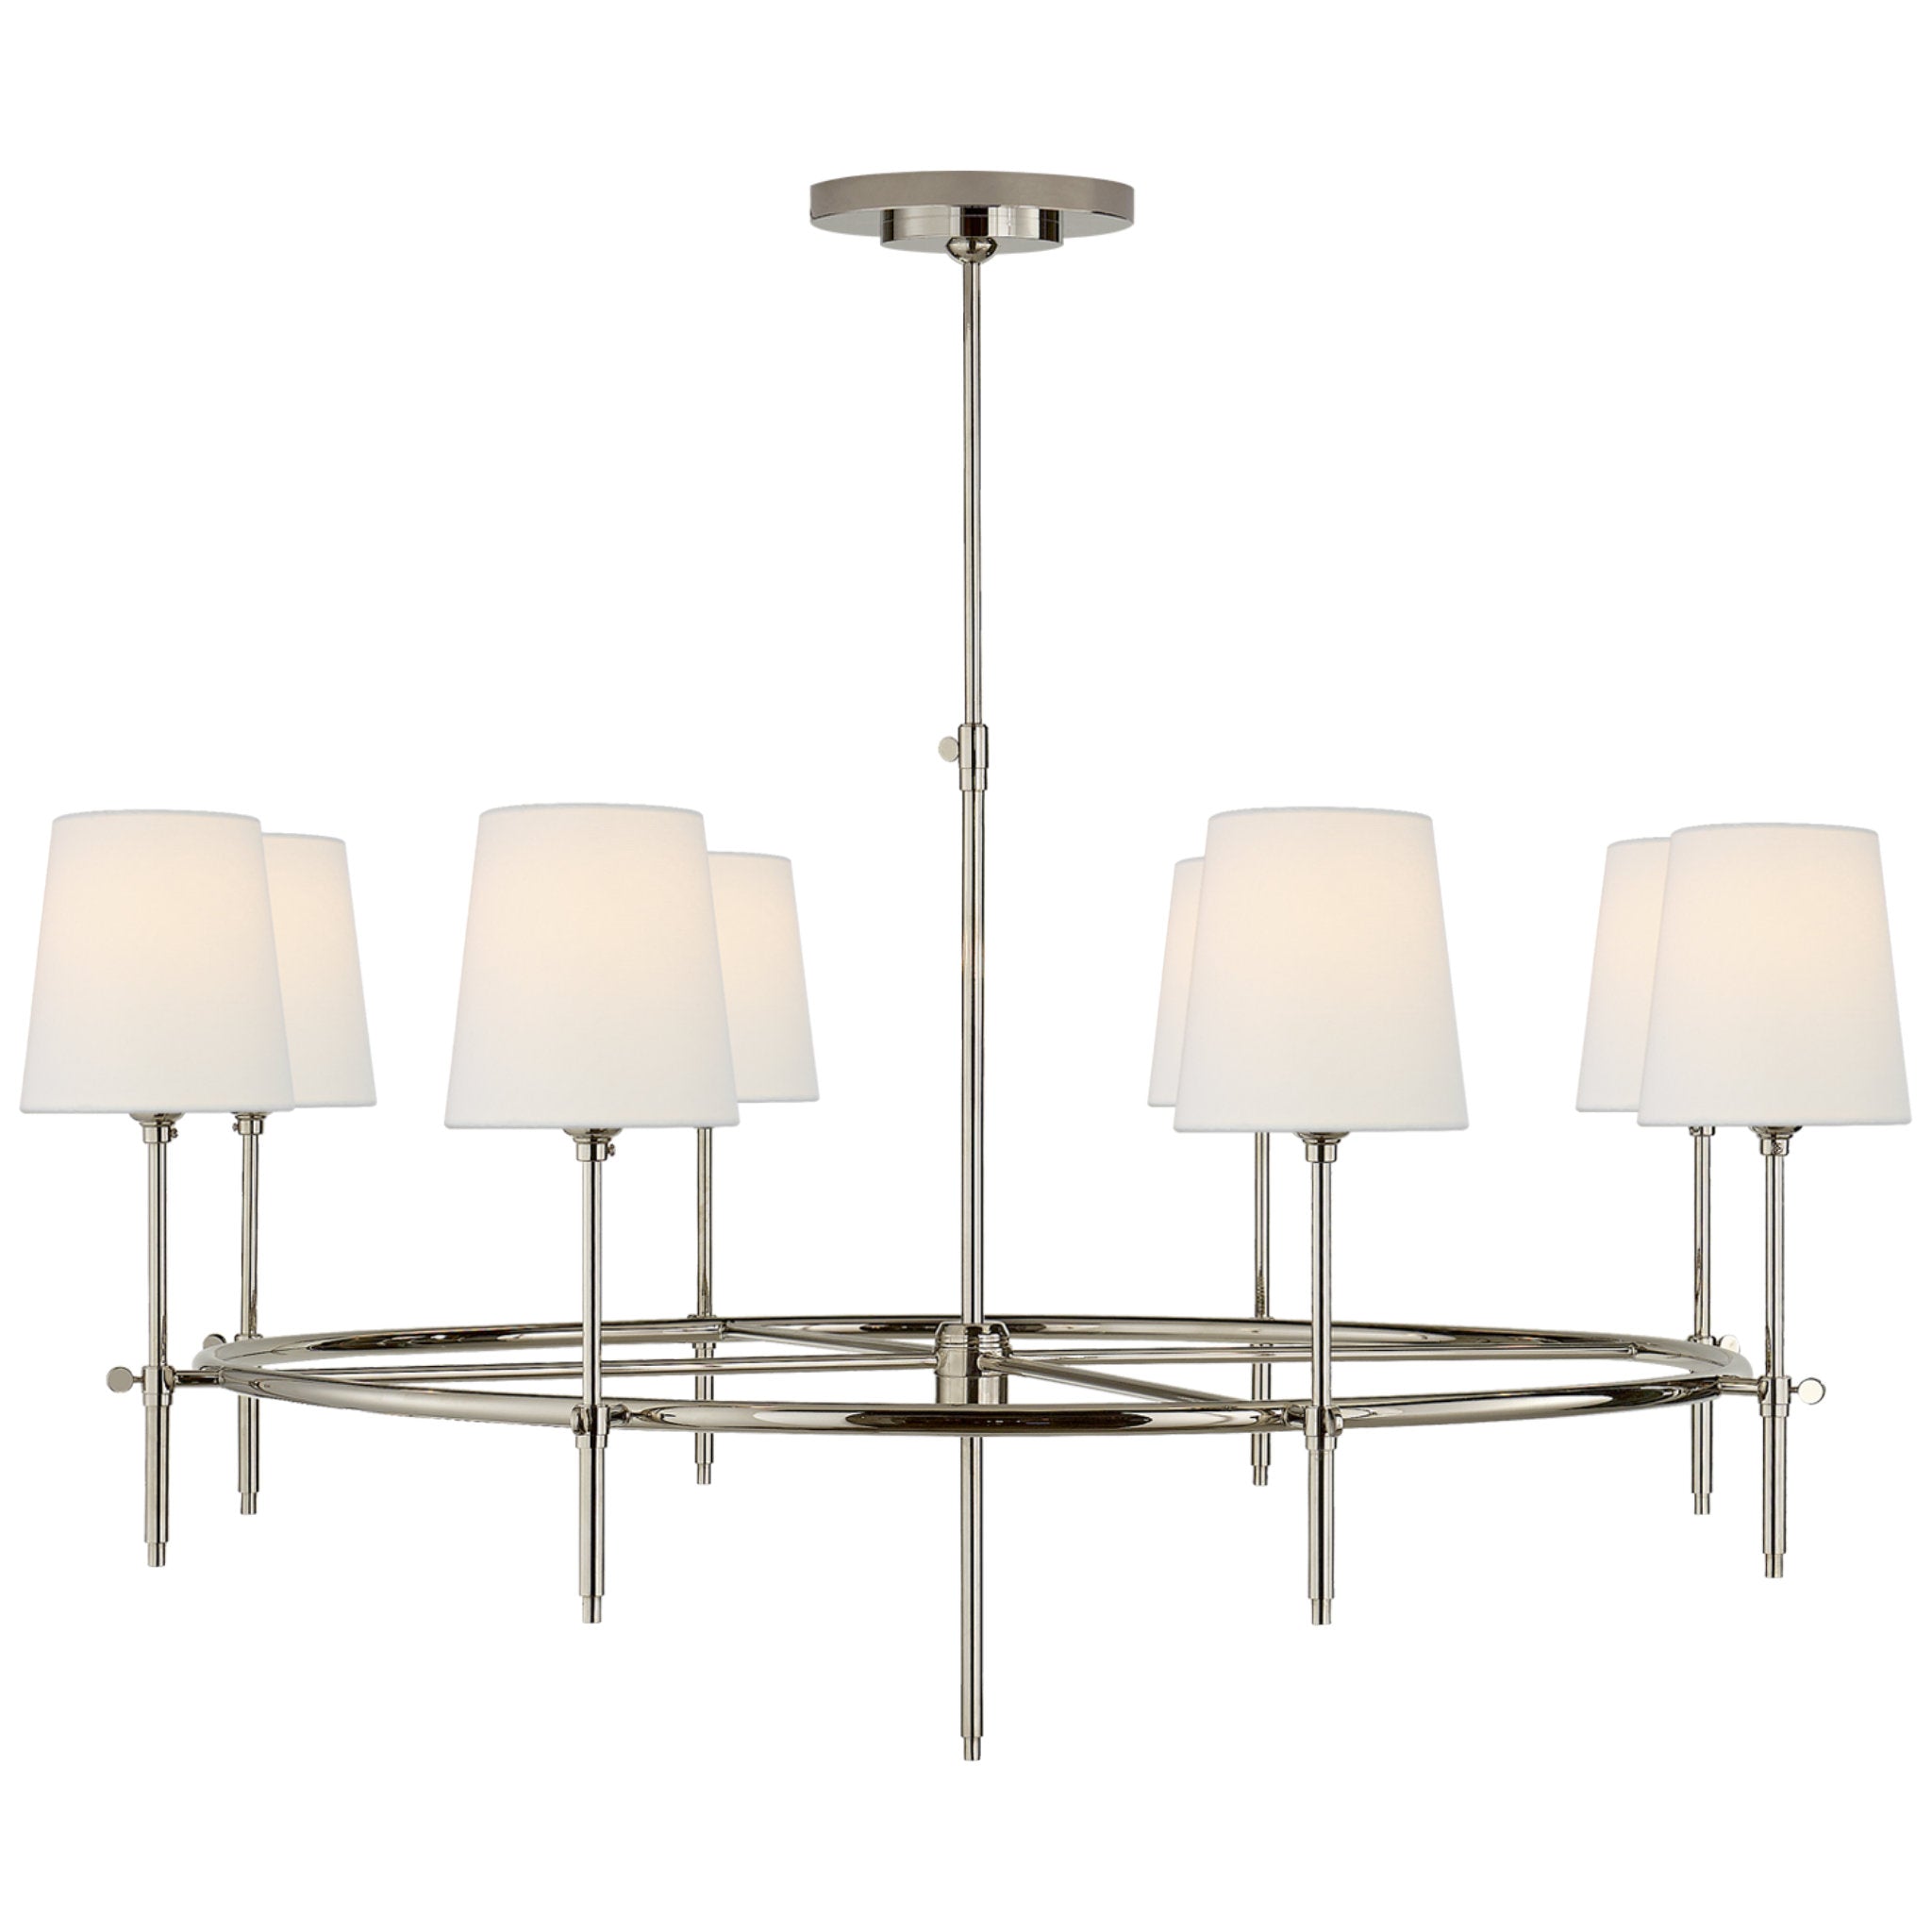 Thomas O'Brien Bryant Large Ring Chandelier in Polished Nickel with Linen Shades